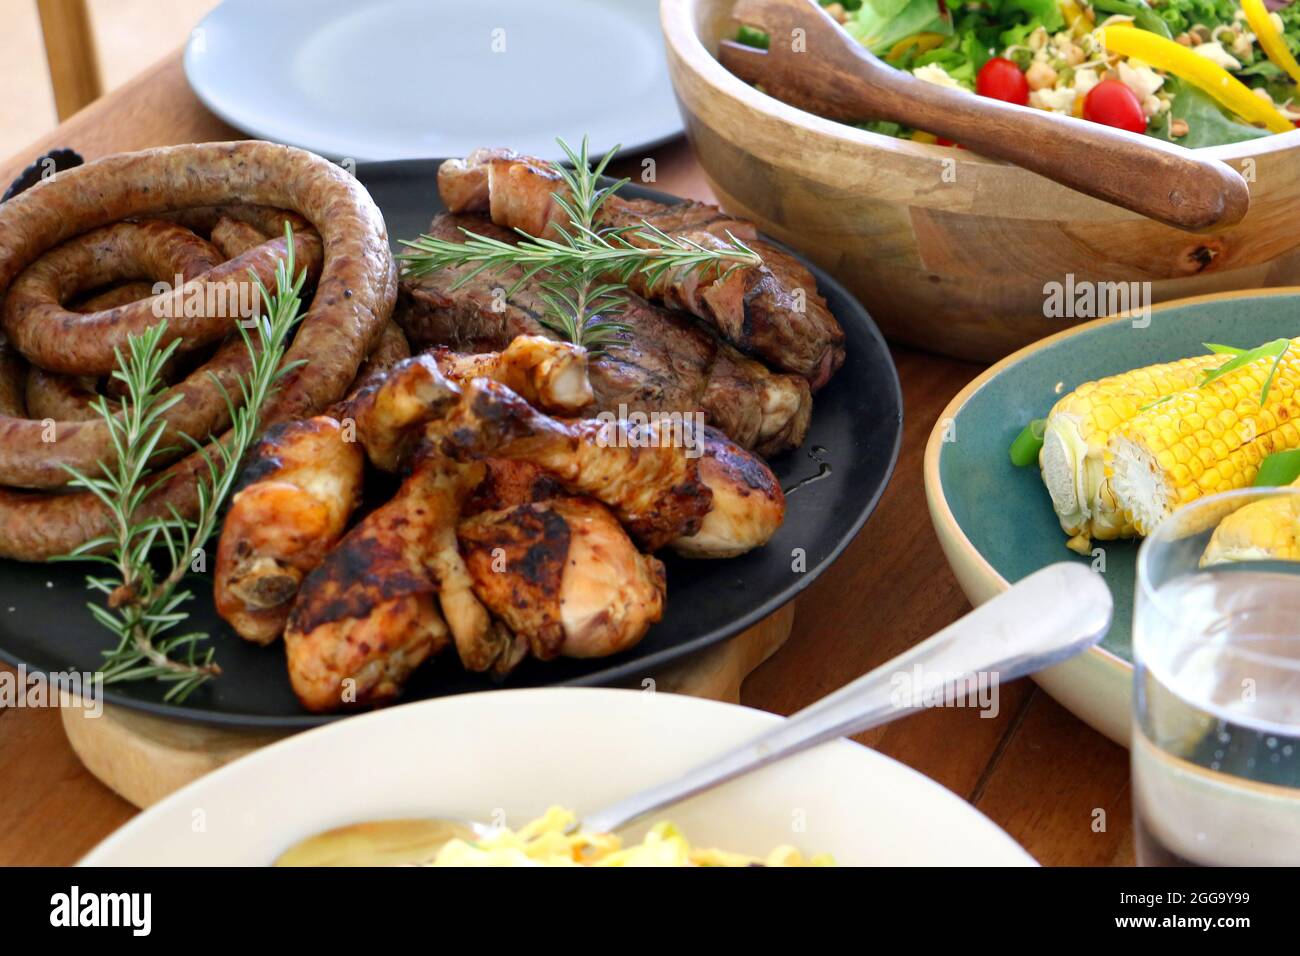 https://c8.alamy.com/comp/2GG9Y99/barbeque-braai-meat-chicken-and-boerewors-on-plates-ready-to-eat-with-salad-and-corn-2GG9Y99.jpg